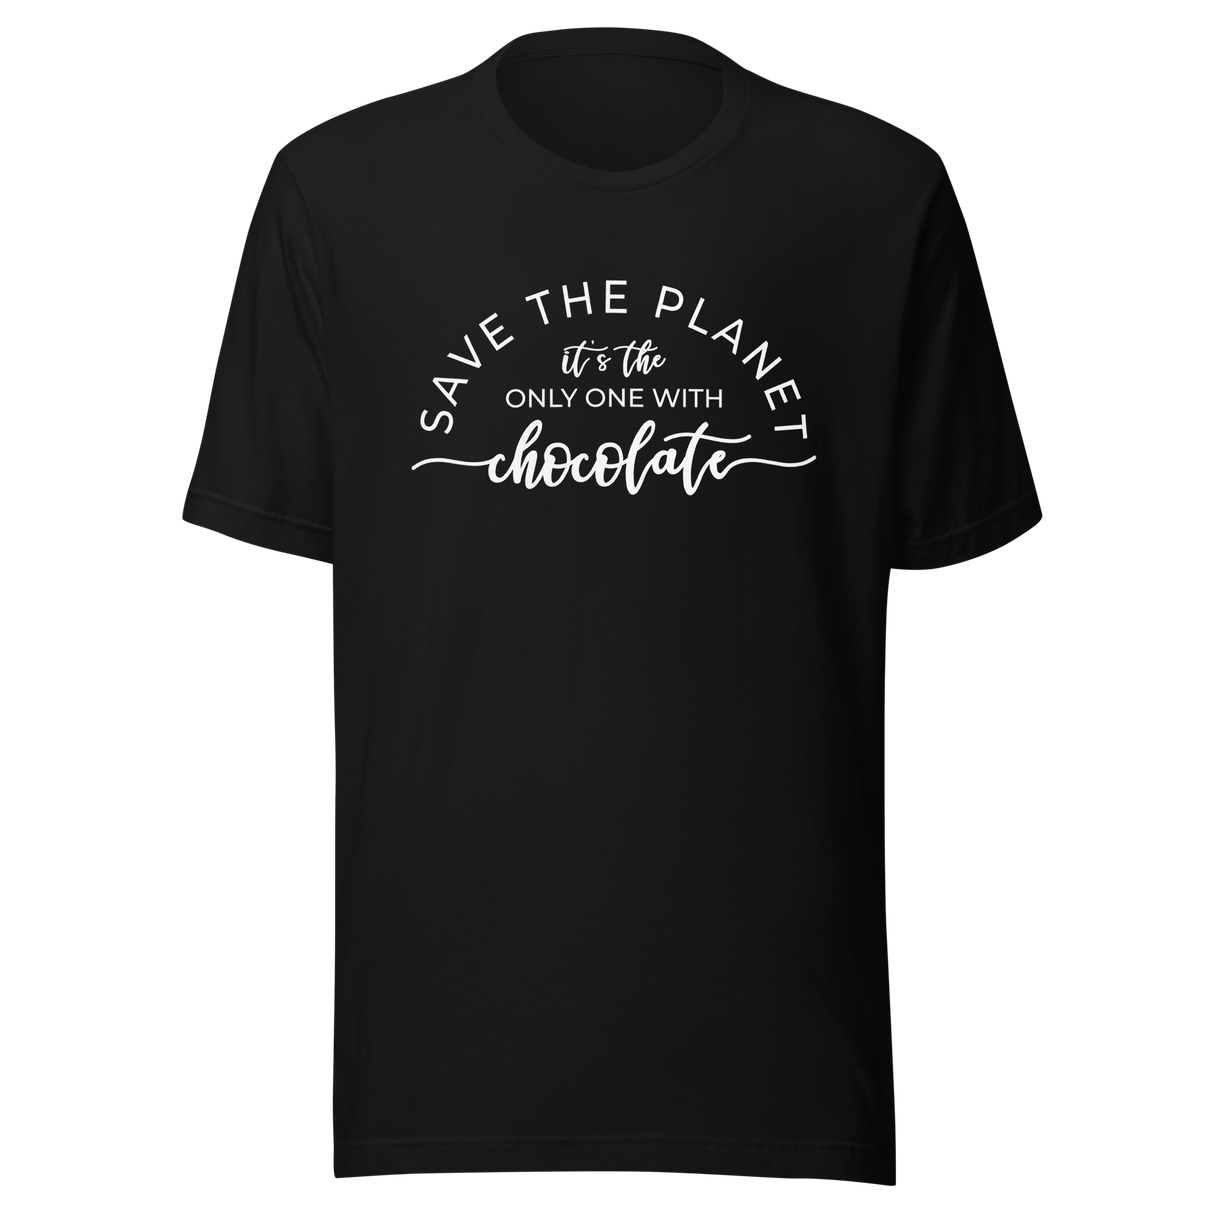 save-the-planet-its-the-only-one-with-chocolate-earth-tee-life-t-shirt-planet-tee-t-shirt-tee#color_black